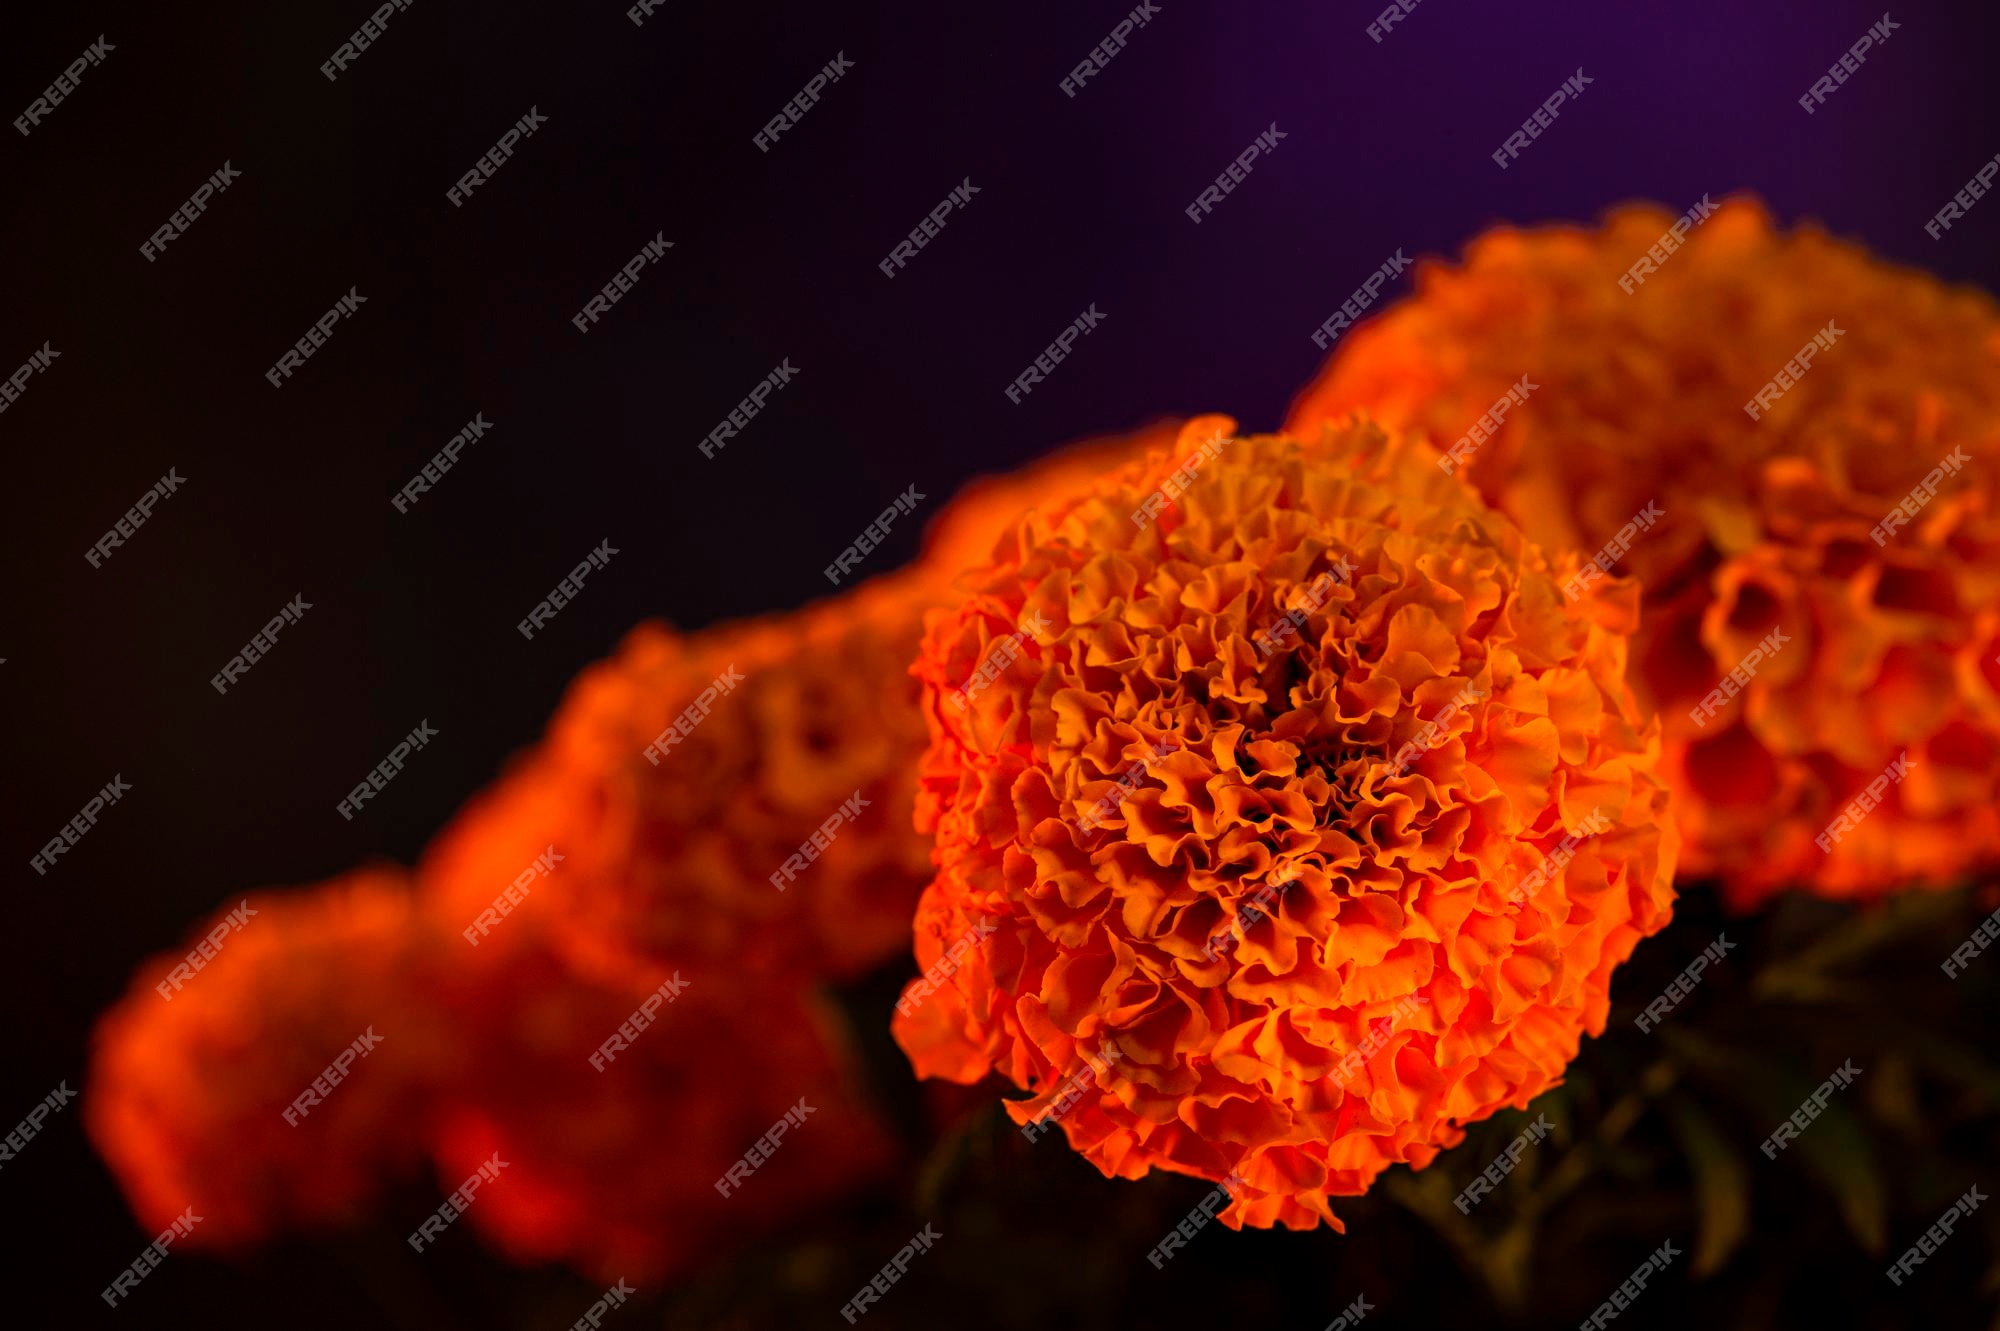 Premium Photo | Cempasuchil yellow marigold flowers cempazchitl for altars  of day of the dead mexico